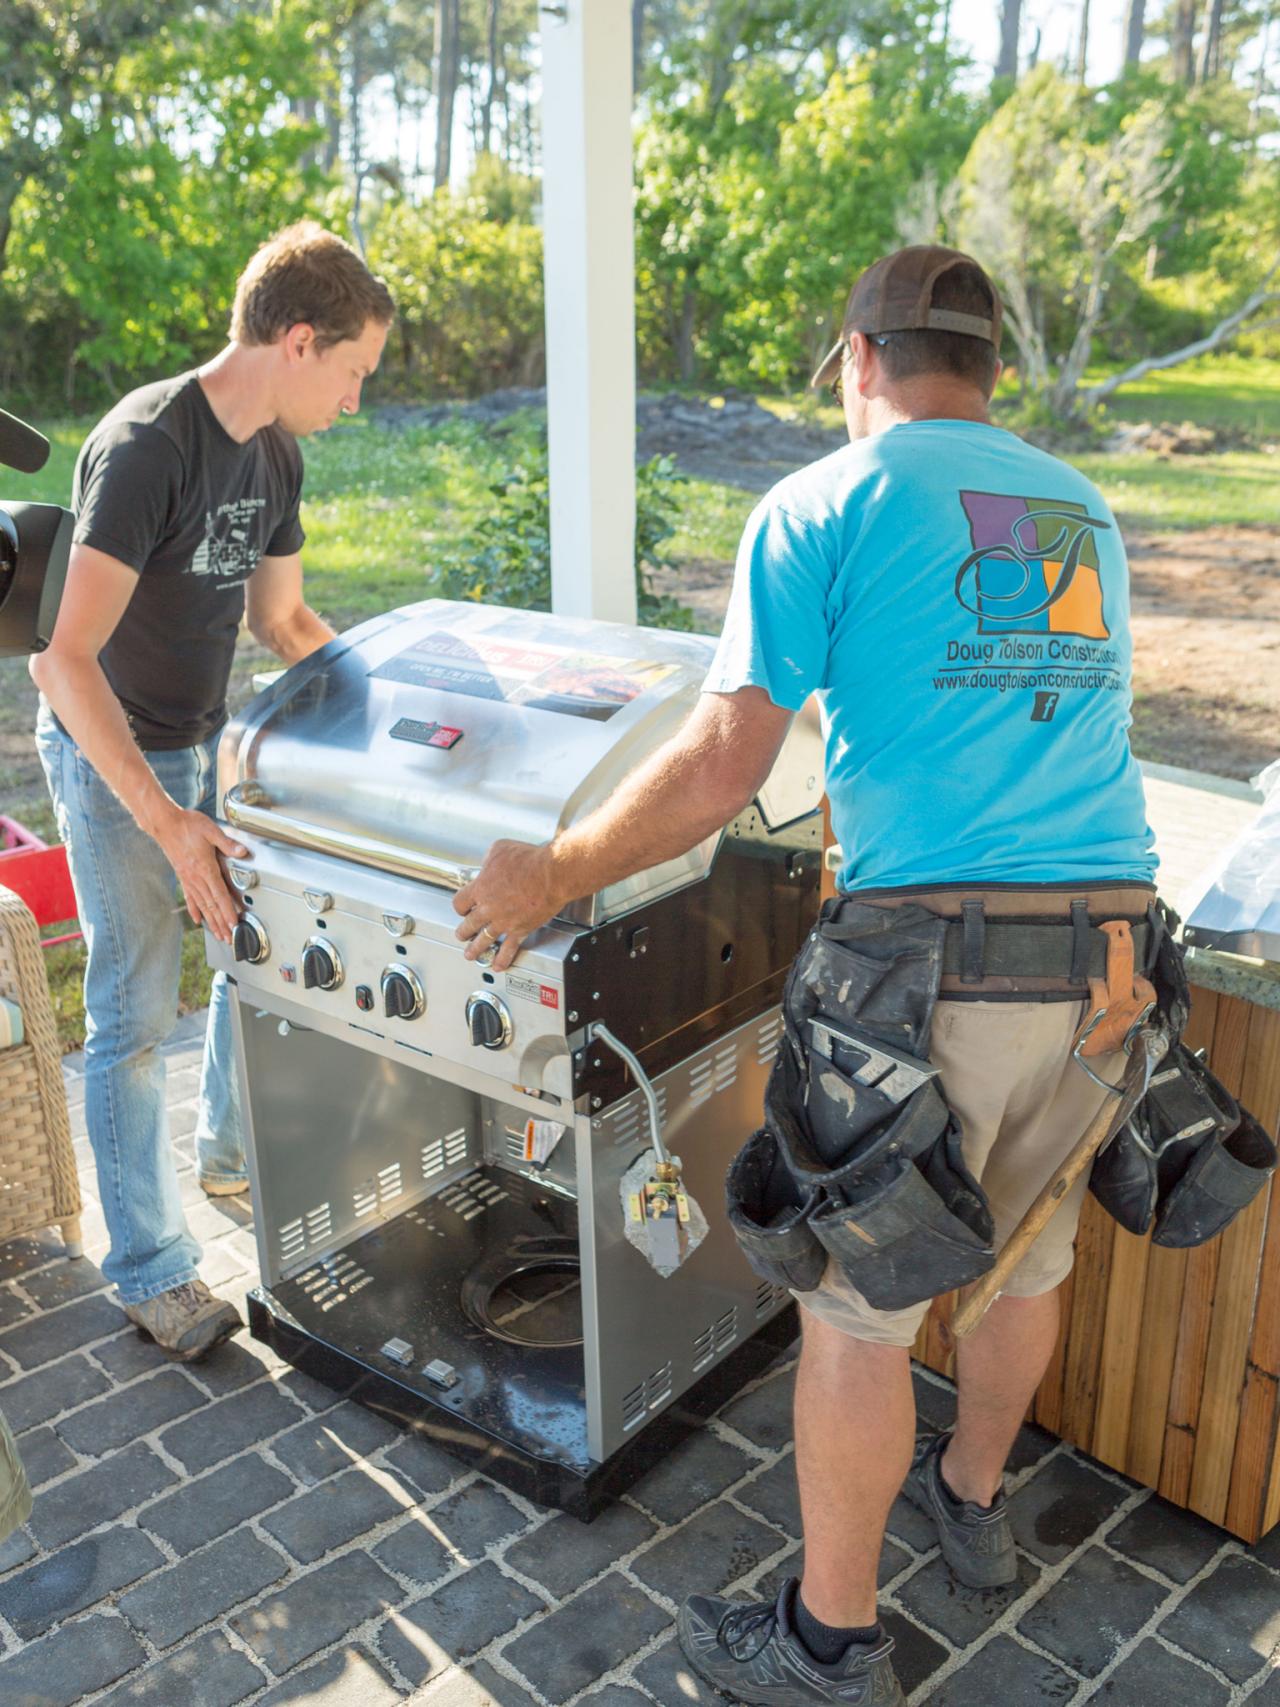 how to build a grilling island | how-tos | diy